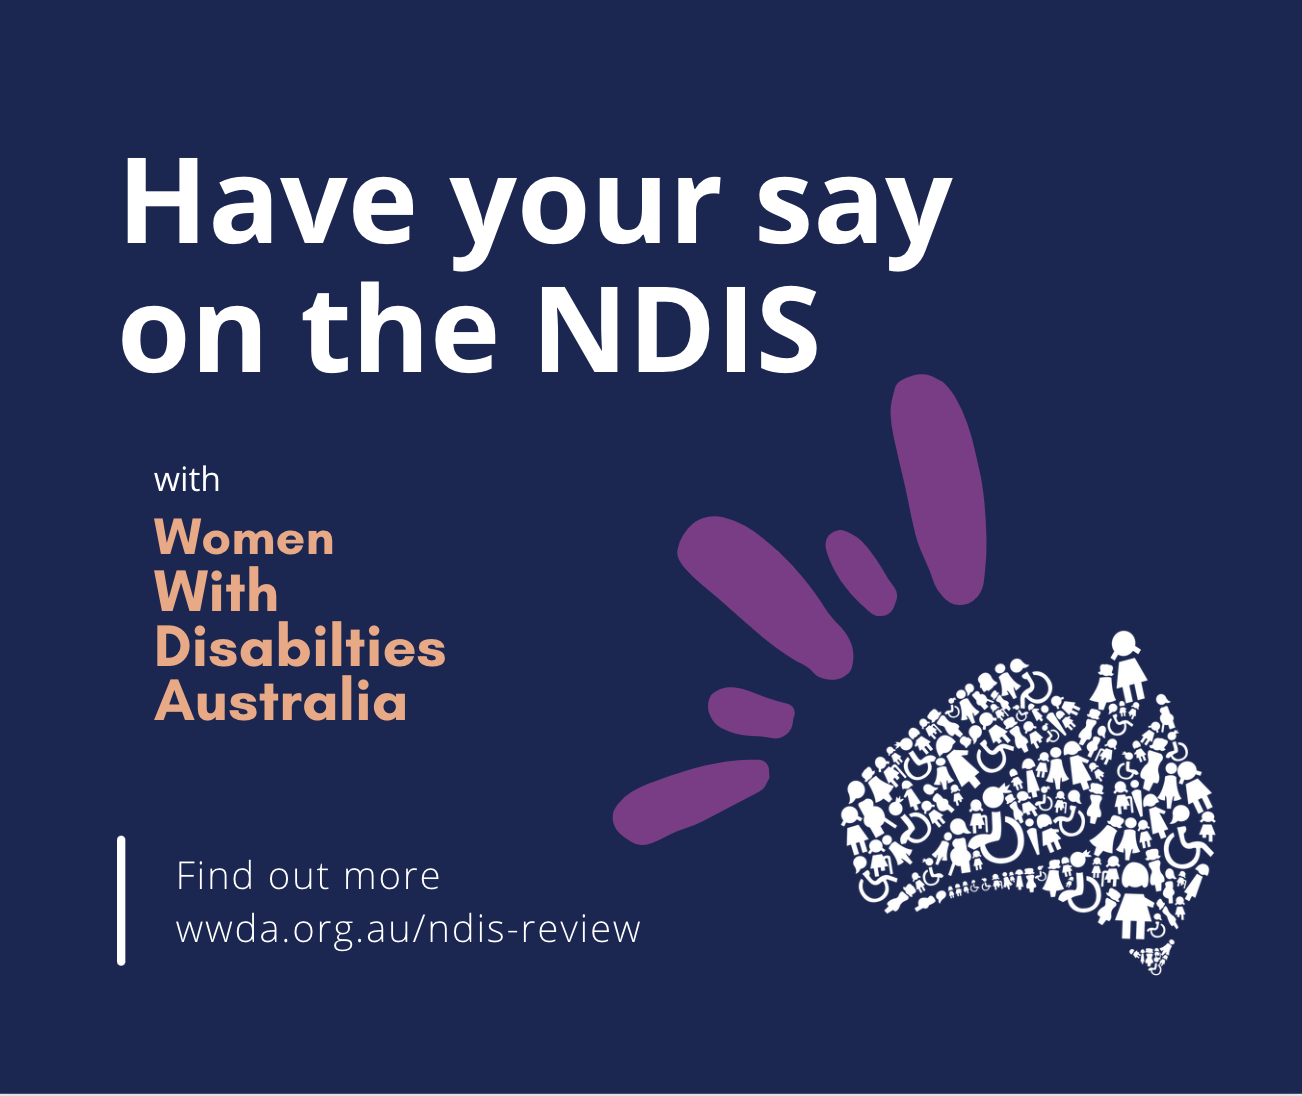 Graphic with dark blue background with white text that reads Have your say on the NDIS with Women With Disabilties Australia, Find out more, wwda.org.au/ndis-review. There is an image with a white Australia logo and purple stripes.